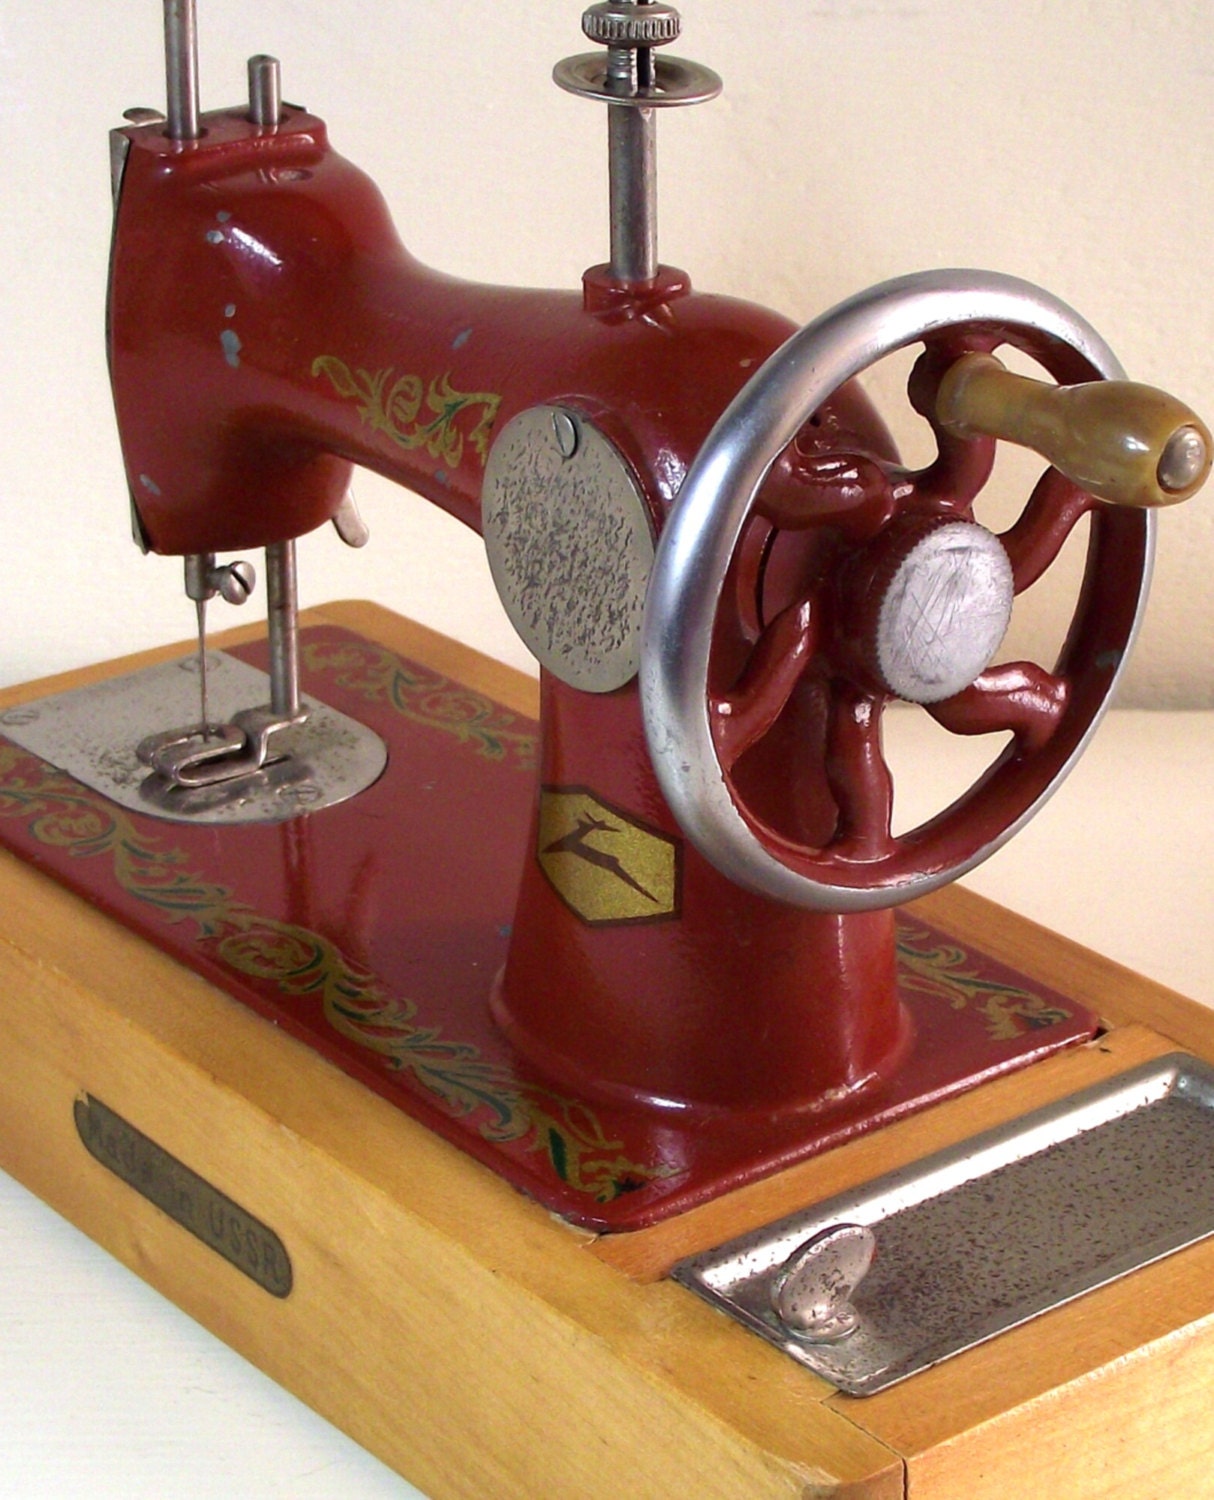 Vintage Children's Miniature Hand Sewing Machine. 1950's. Made in USSR. Collectable.